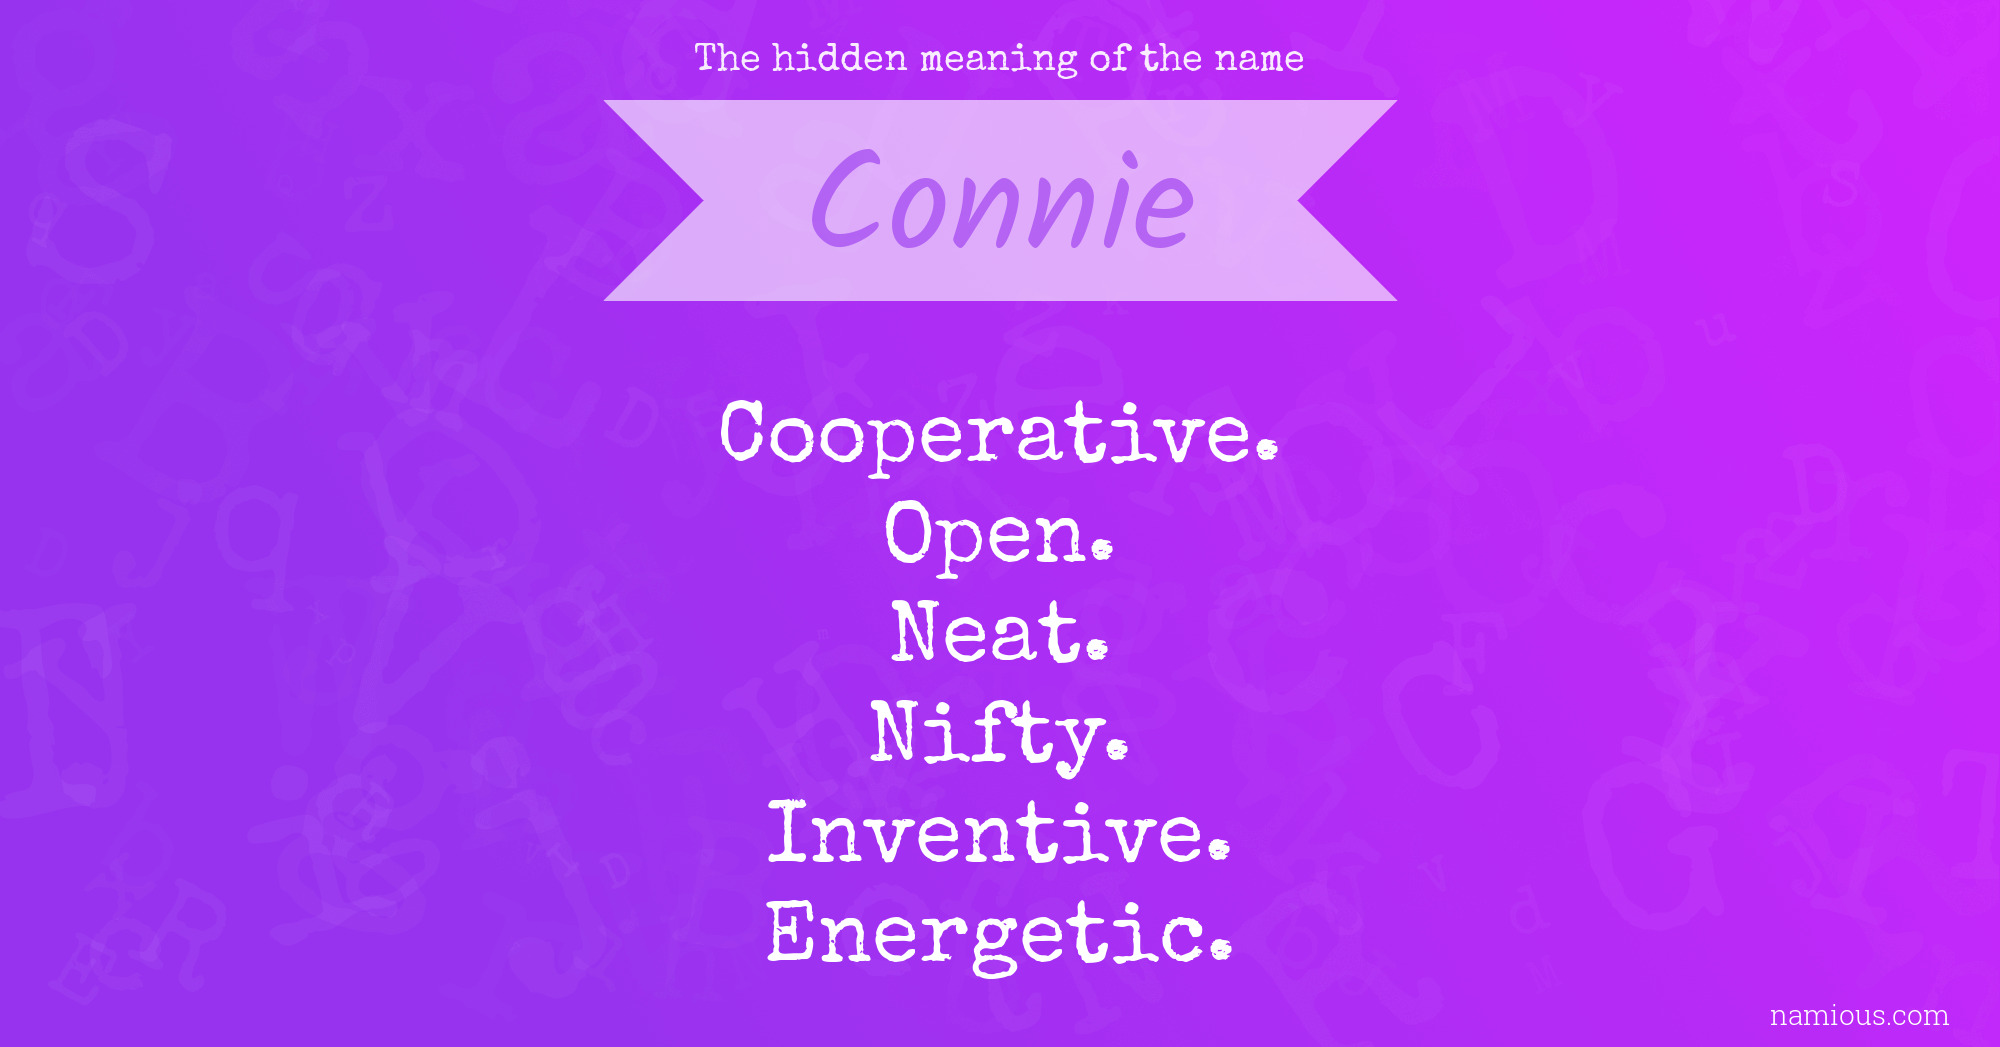 The hidden meaning of the name Connie